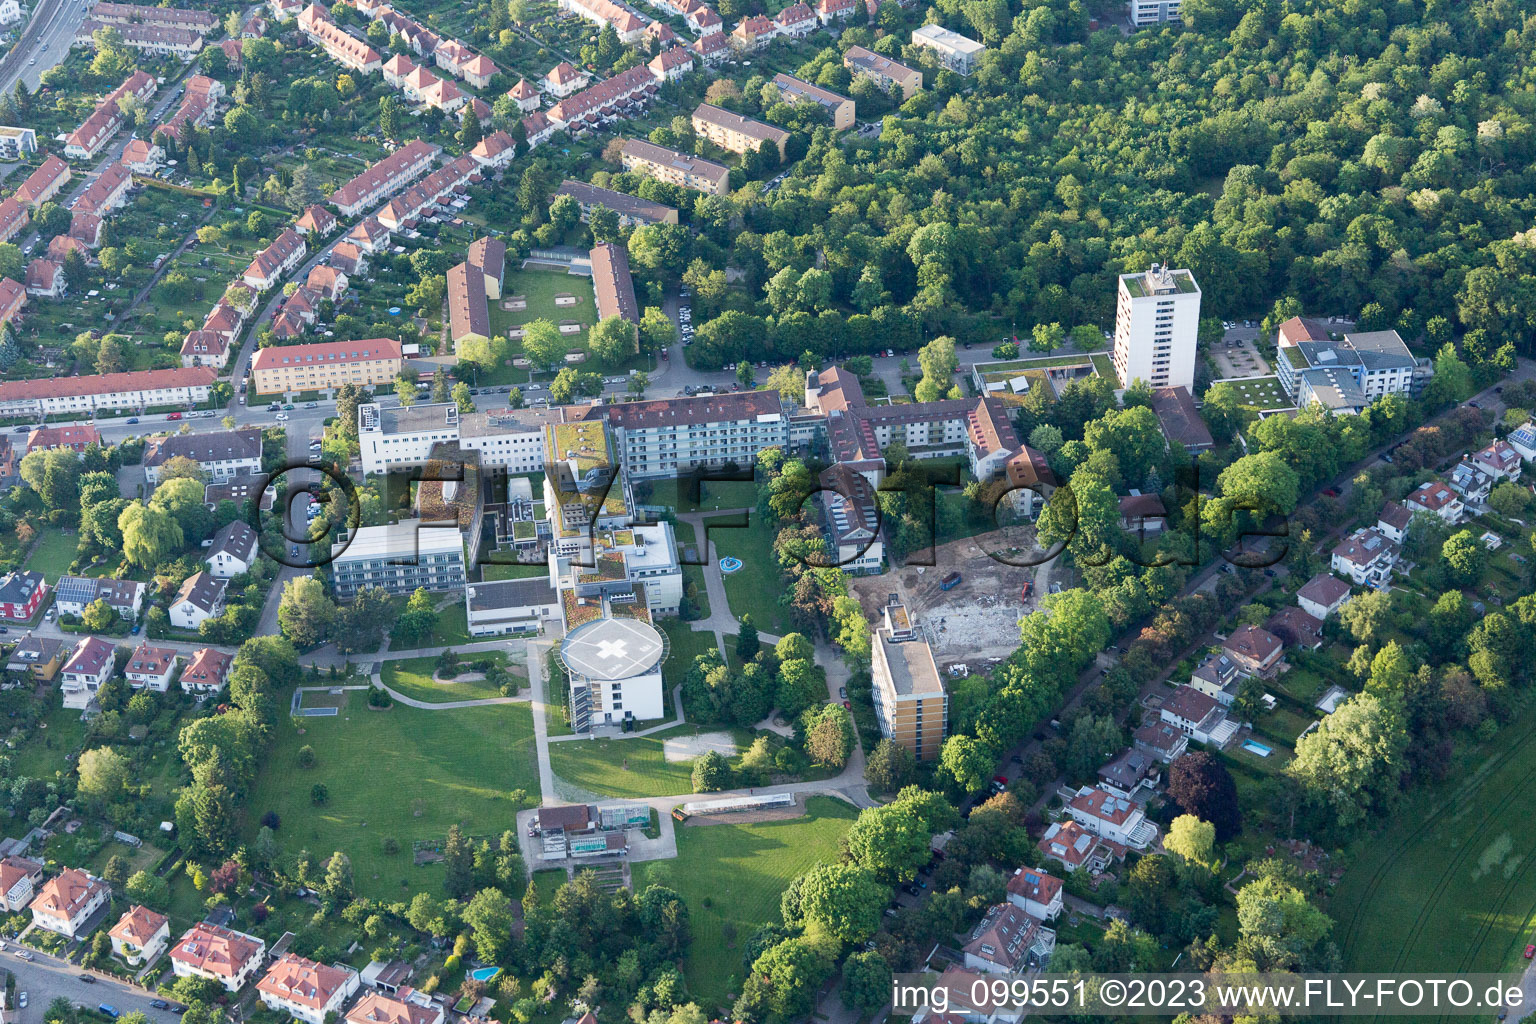 Aerial view of Deaconess KH in the district Rüppurr in Karlsruhe in the state Baden-Wuerttemberg, Germany